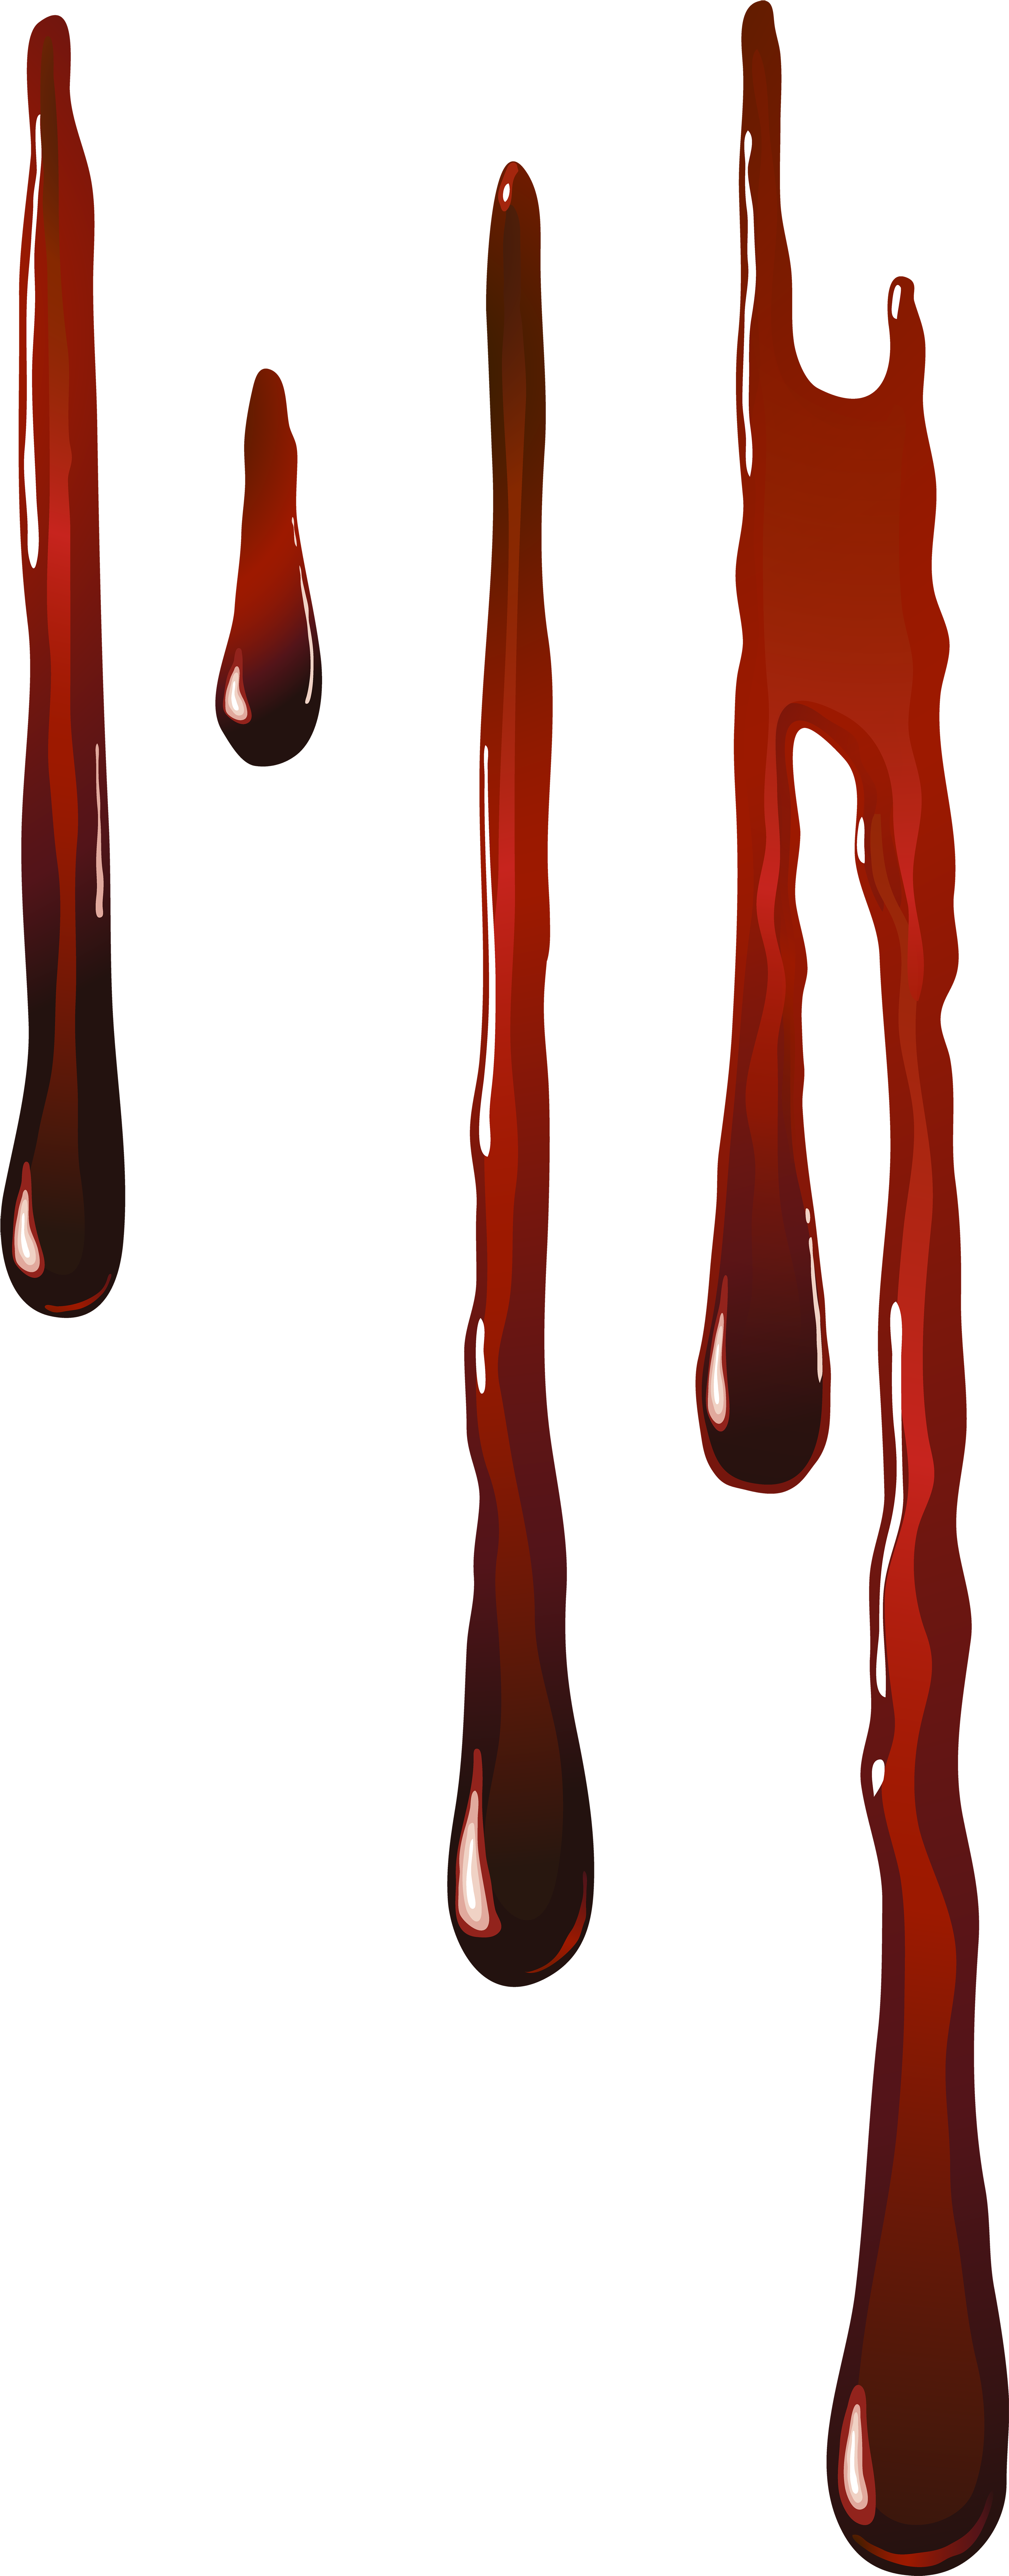 Free Blood Drops Png, Download Free Blood Drops Png png images, Free